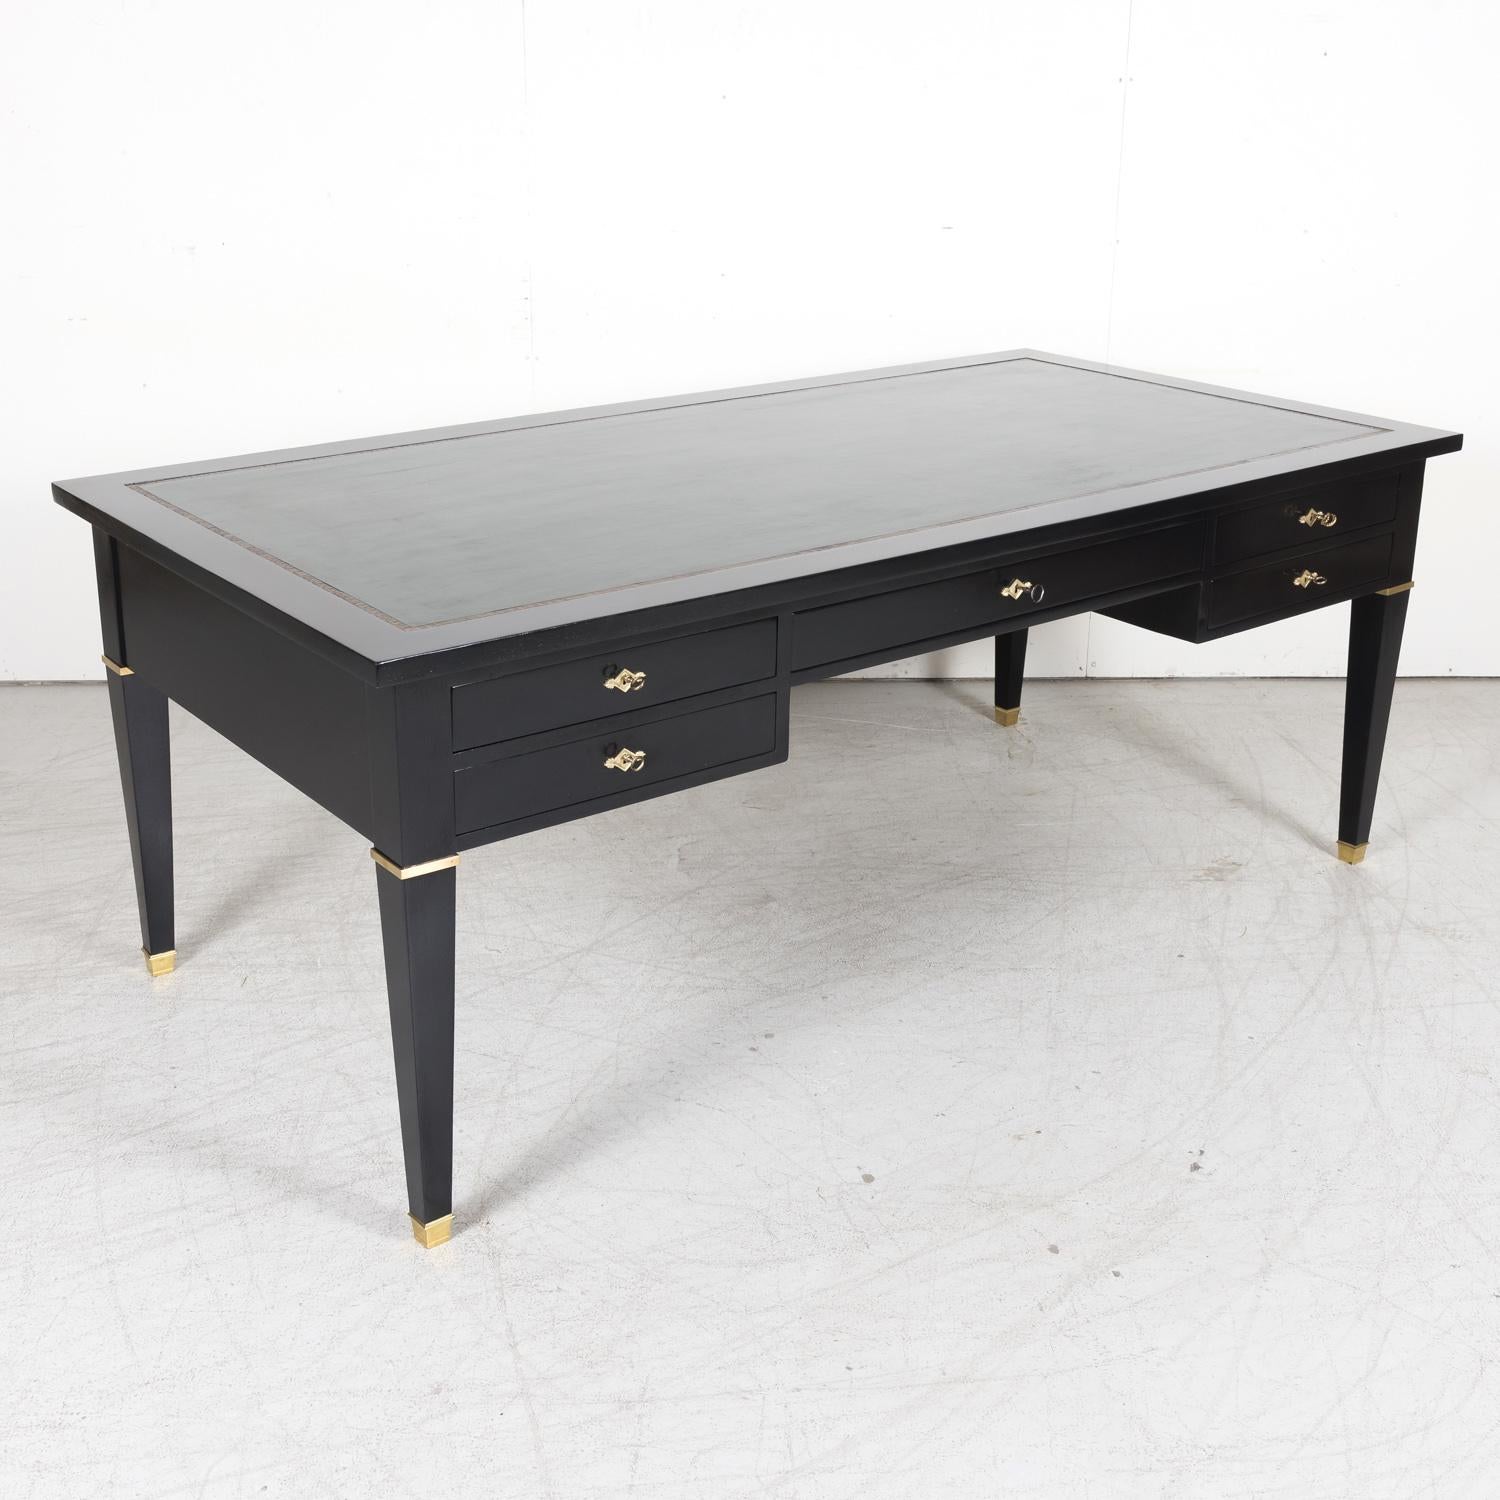 An exceptional mid-20th century Maison Jansen attributed French Louis XVI style bureau plat or desk, circa 1930s. Having an ebonized semi-gloss lacquered finish with the original inset dark forest green leather writing surface with embossed gilding